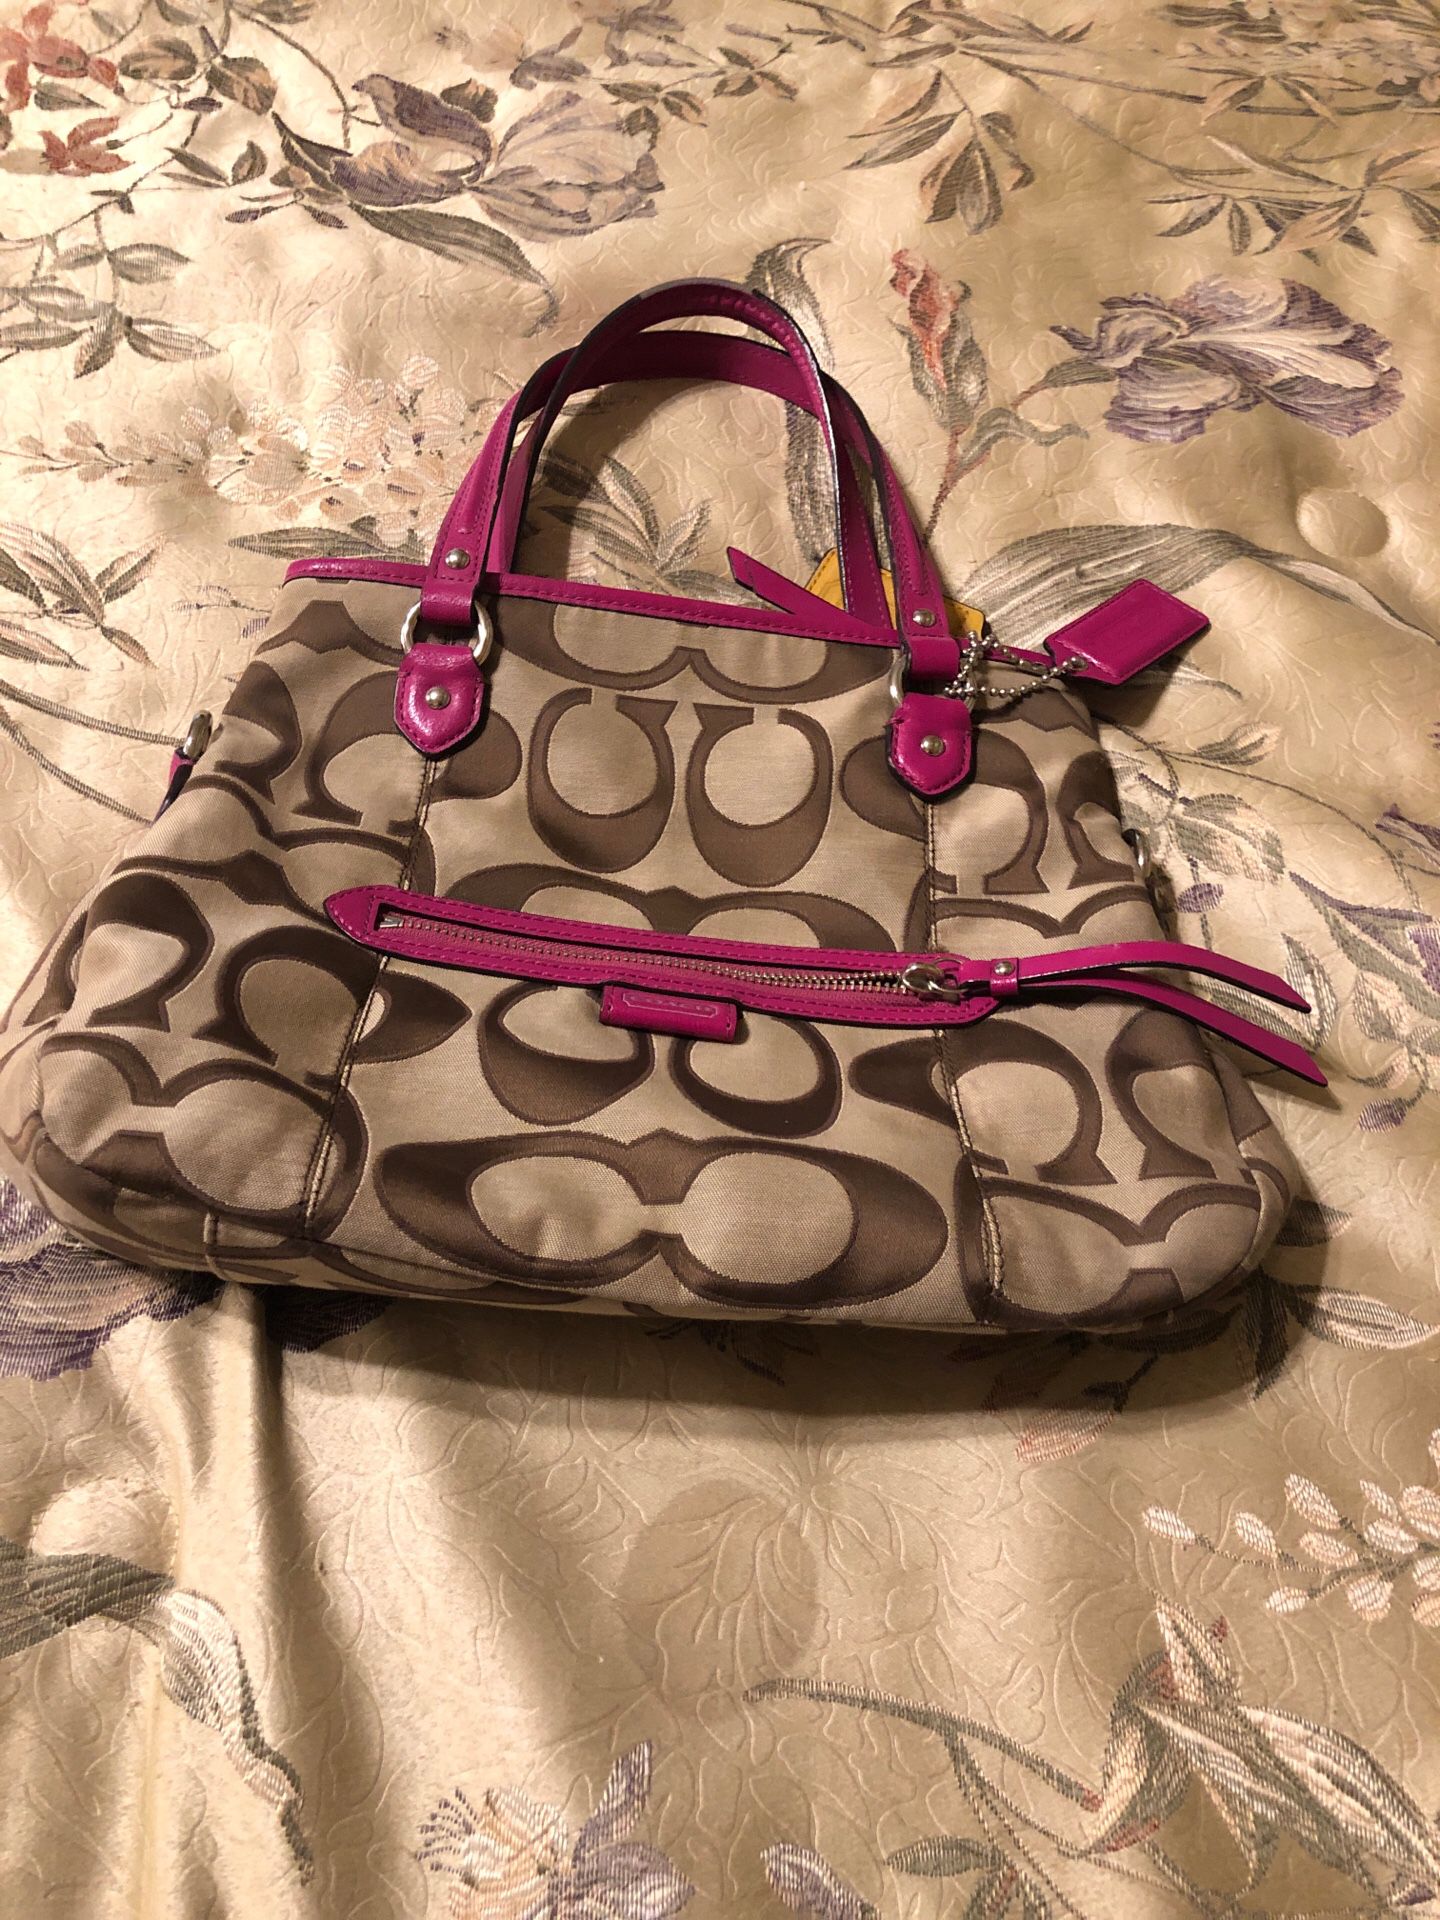 Authentic coach purse. Like new condition